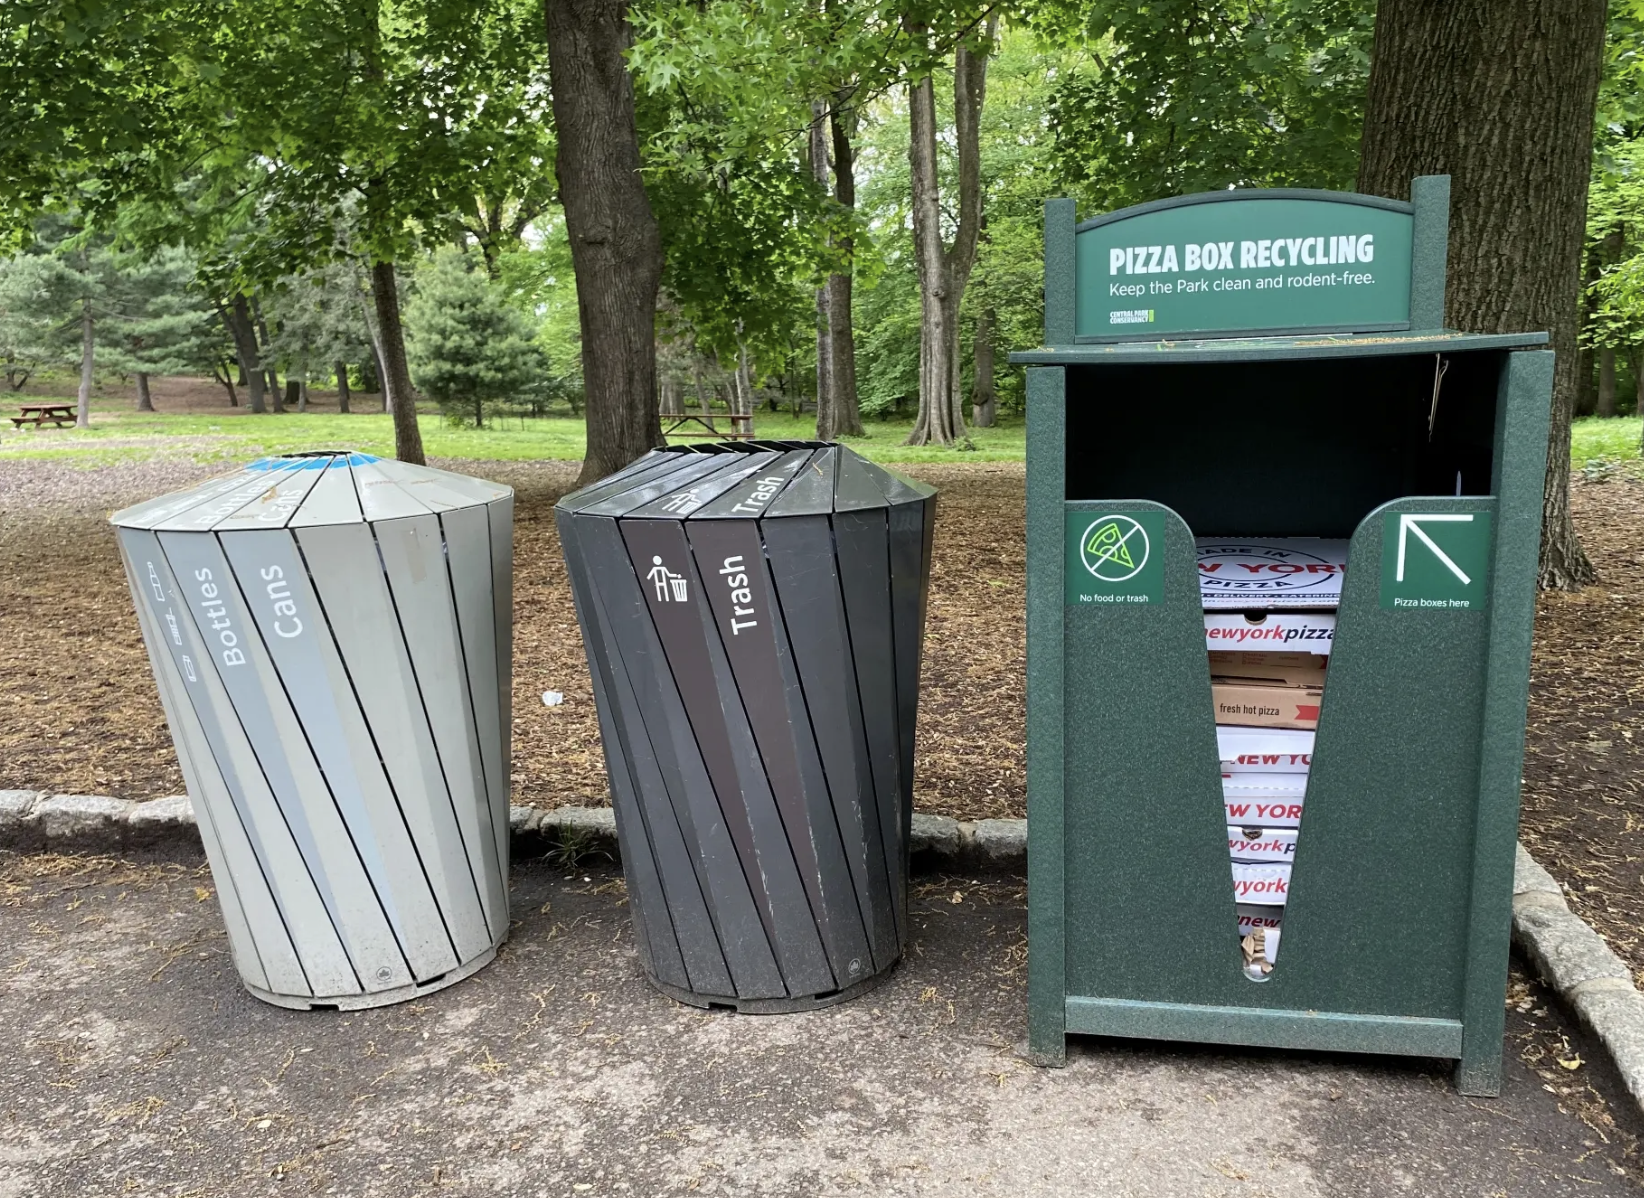 Check out the new pizza recycling boxes now in Central Park